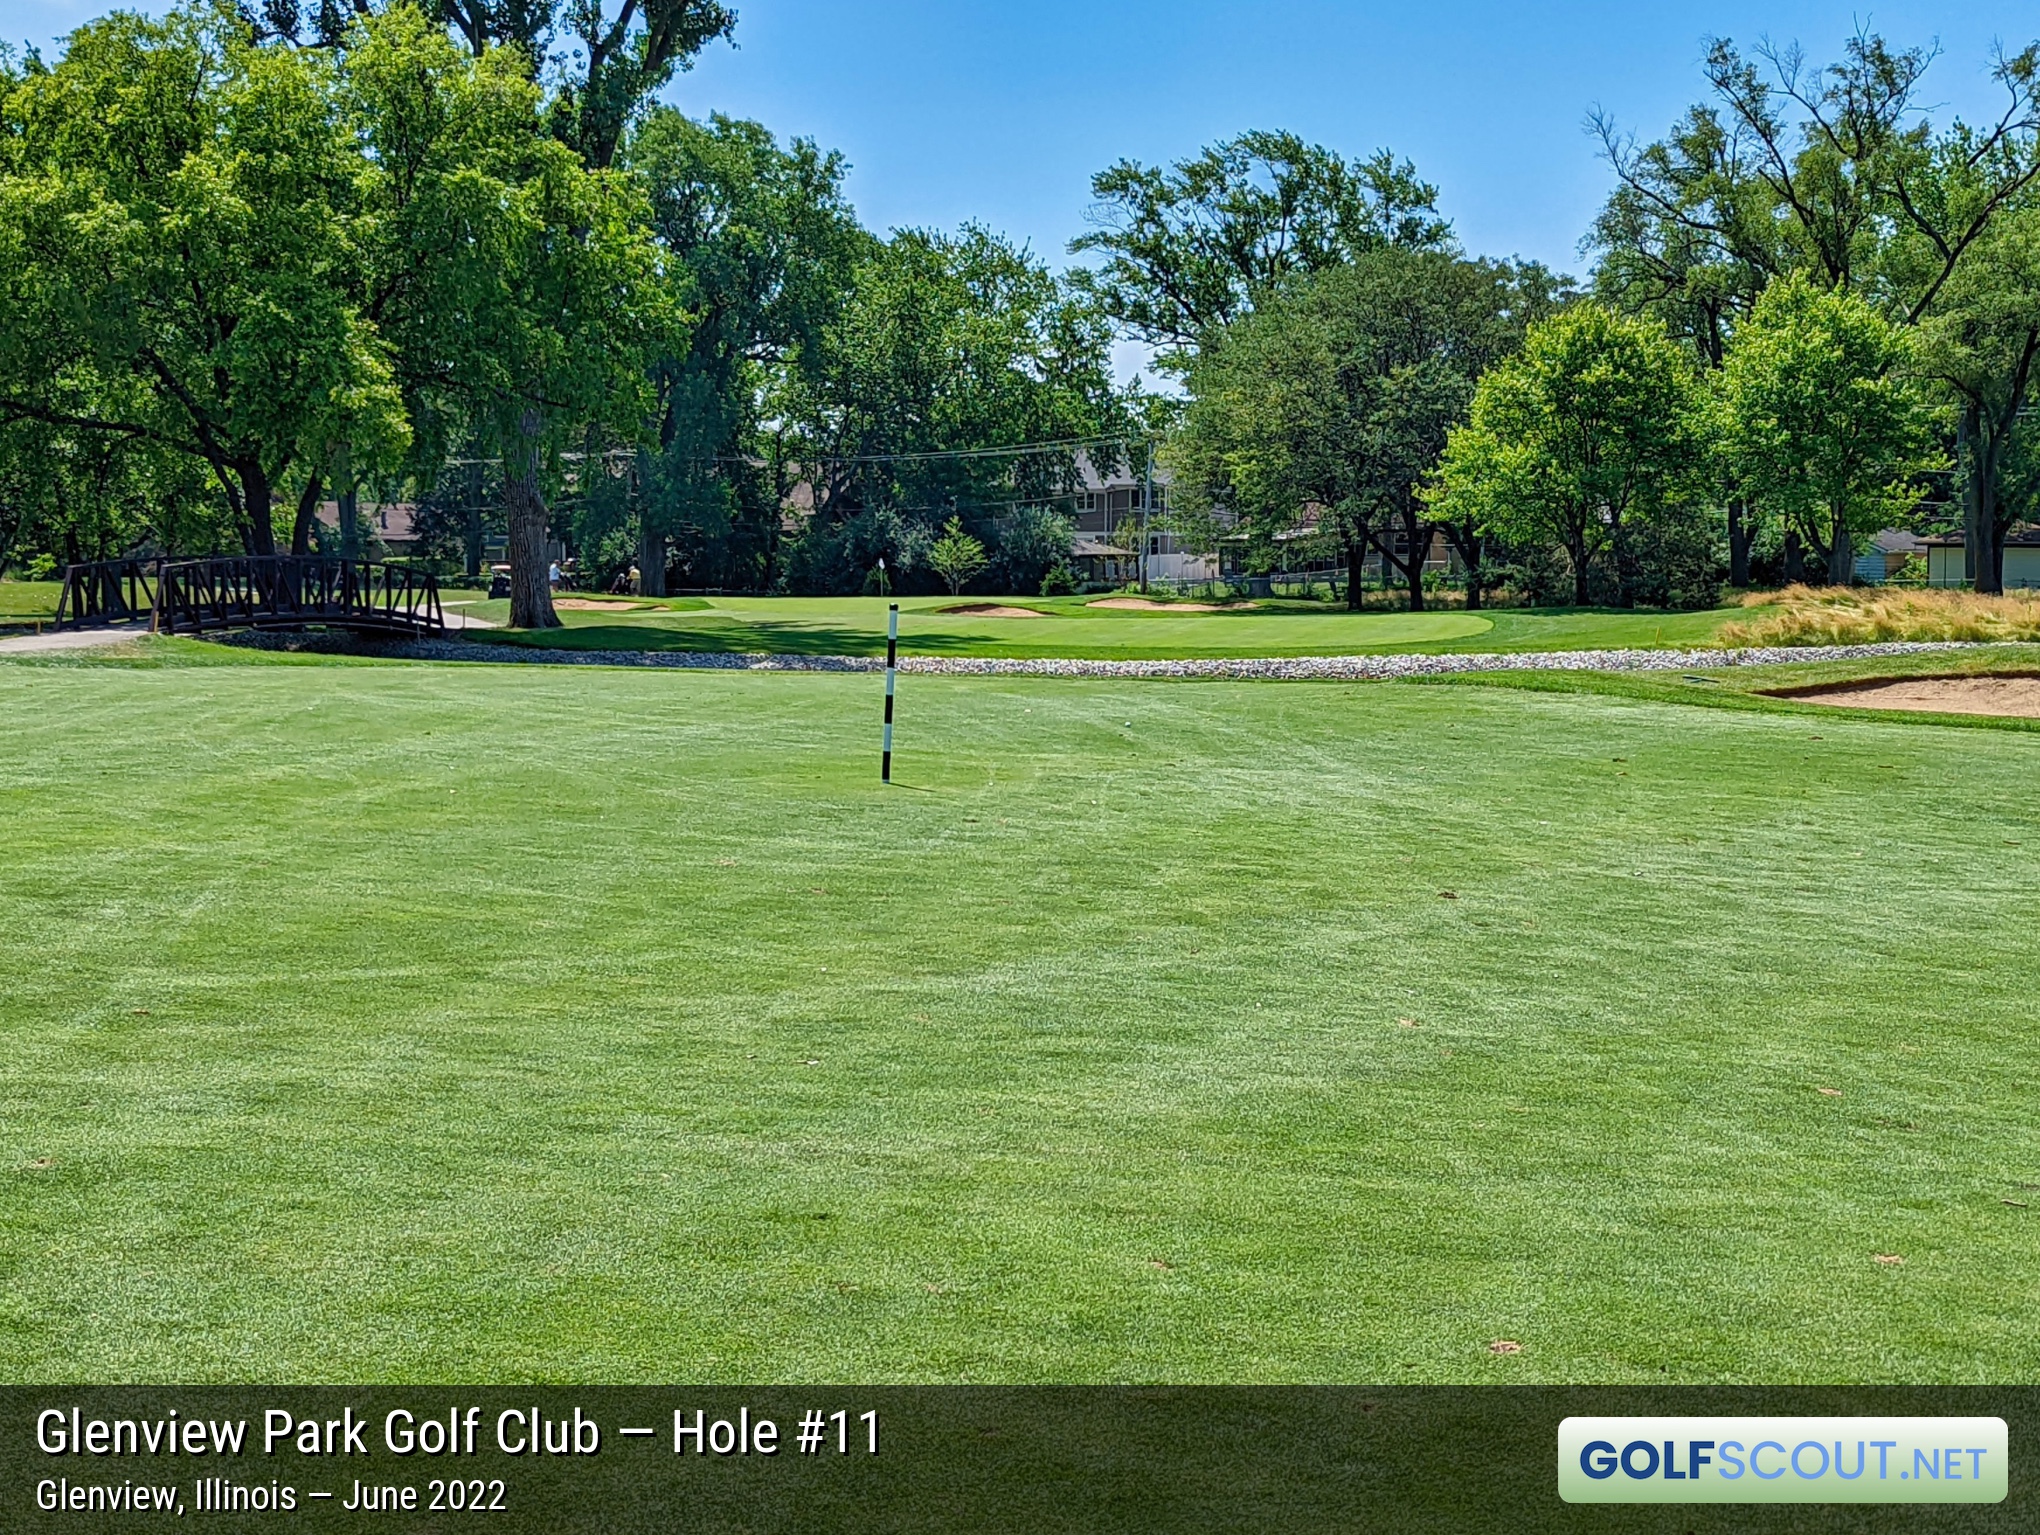 Photo of hole #11 at Glenview Park Golf Club in Glenview, Illinois. 